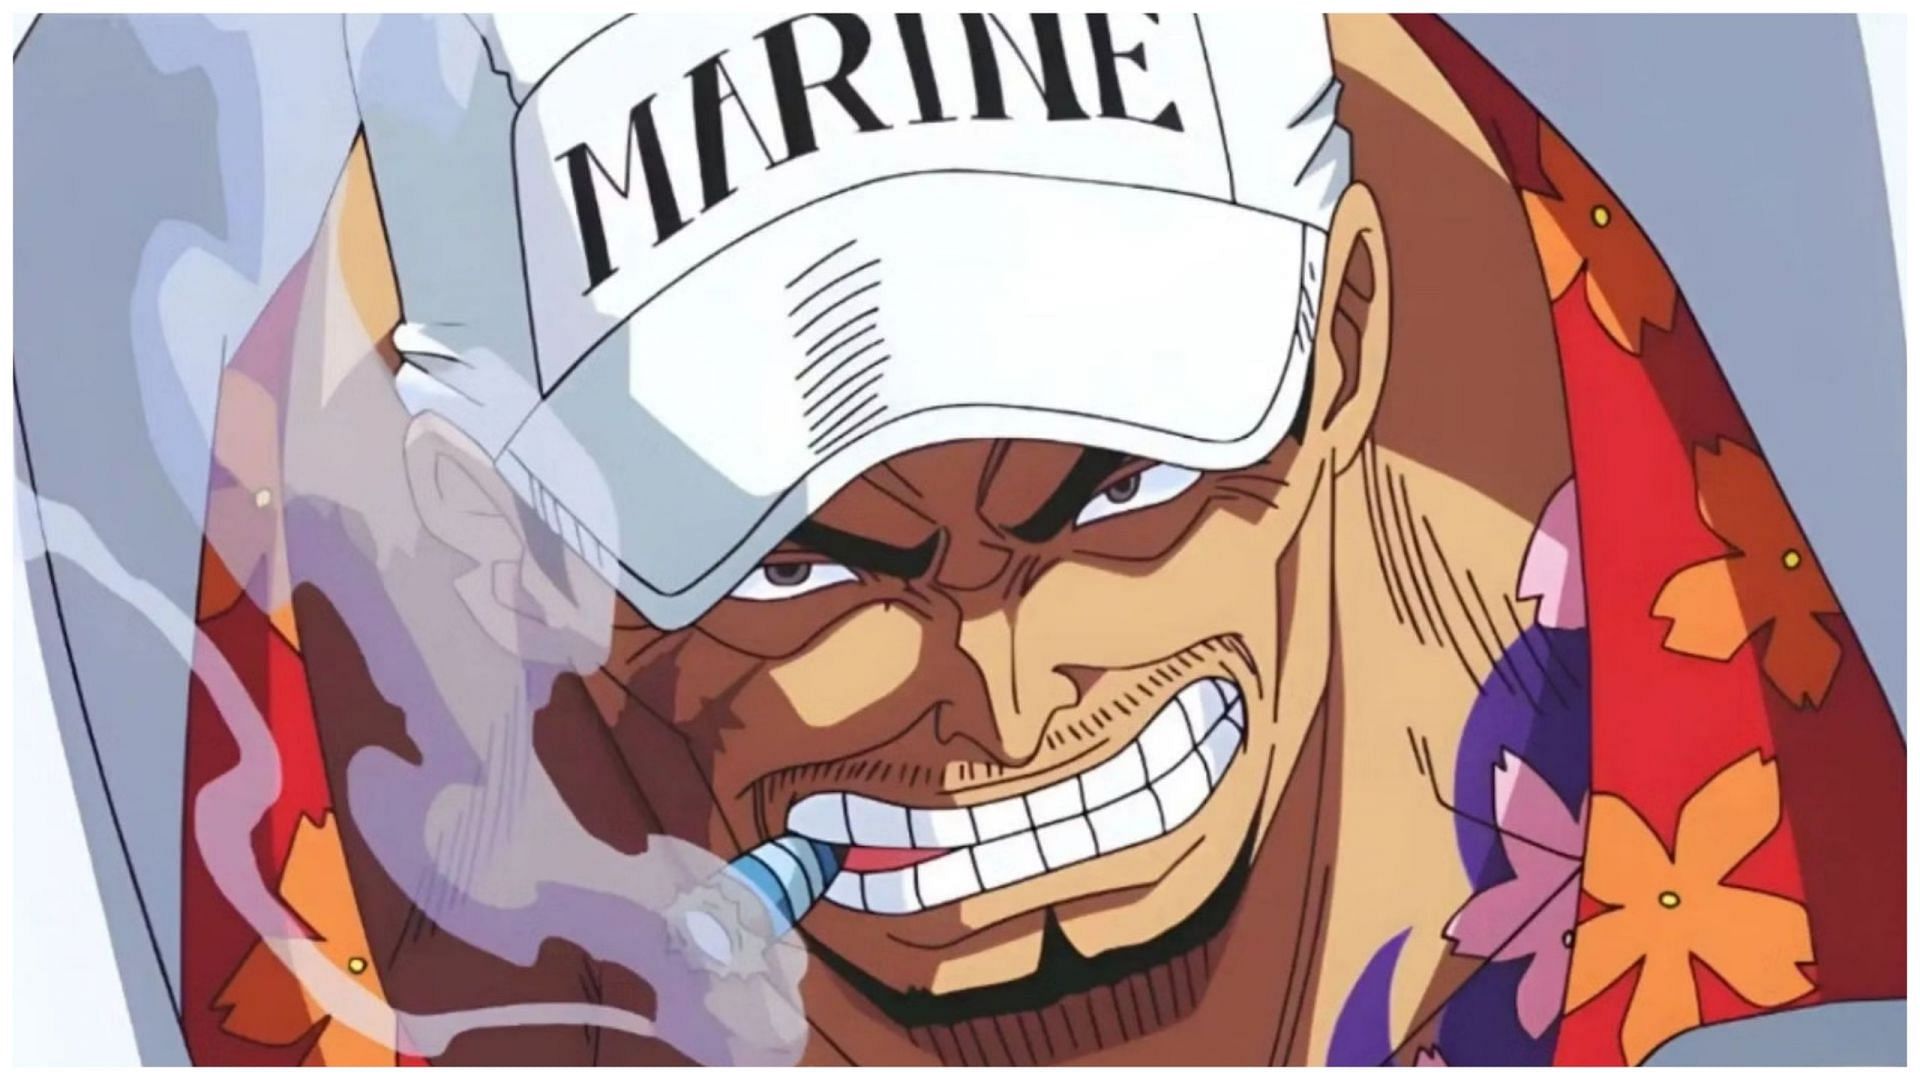 Disrespected anime character from One Piece (Image via Toei Animation)